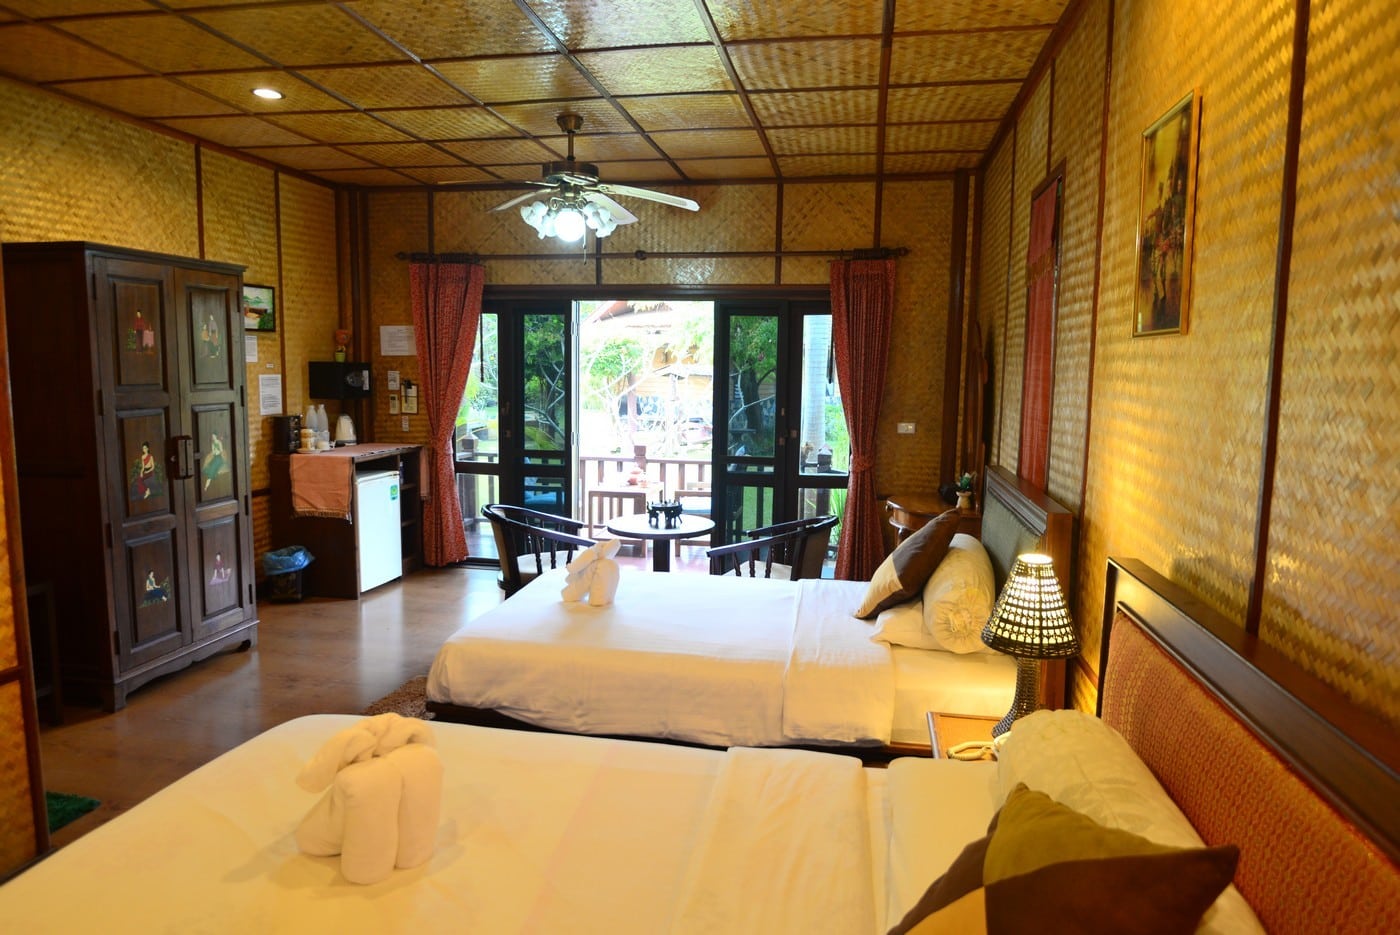 Whistling Duck Room - 1 Kingsize bed + 1 single bed, garden view